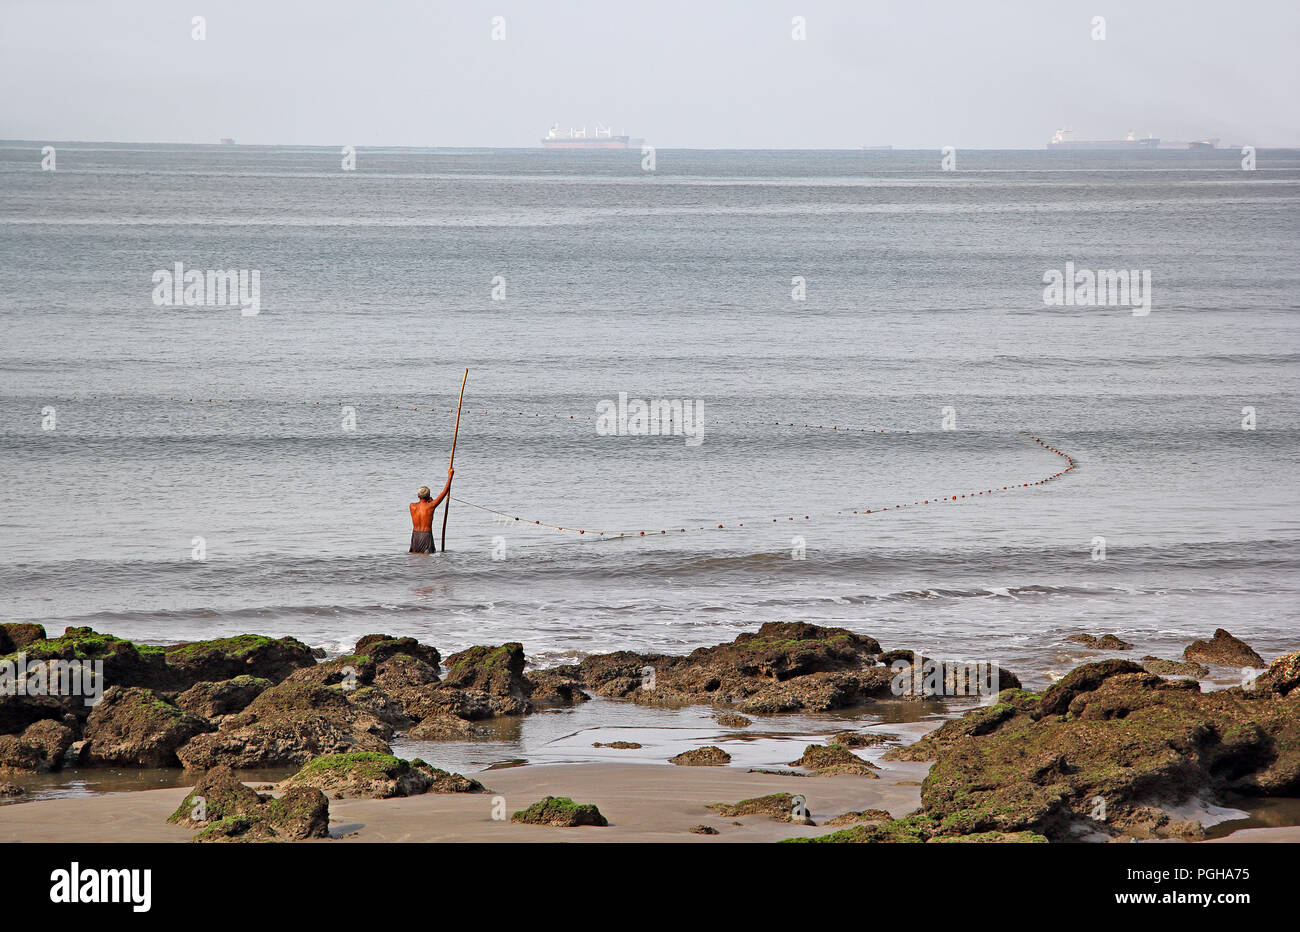 Lone fisherman stand in water with long pole while casting trap net for catching fish at Reis Magos Beach along Mandovi River in Goa, India Stock Photo